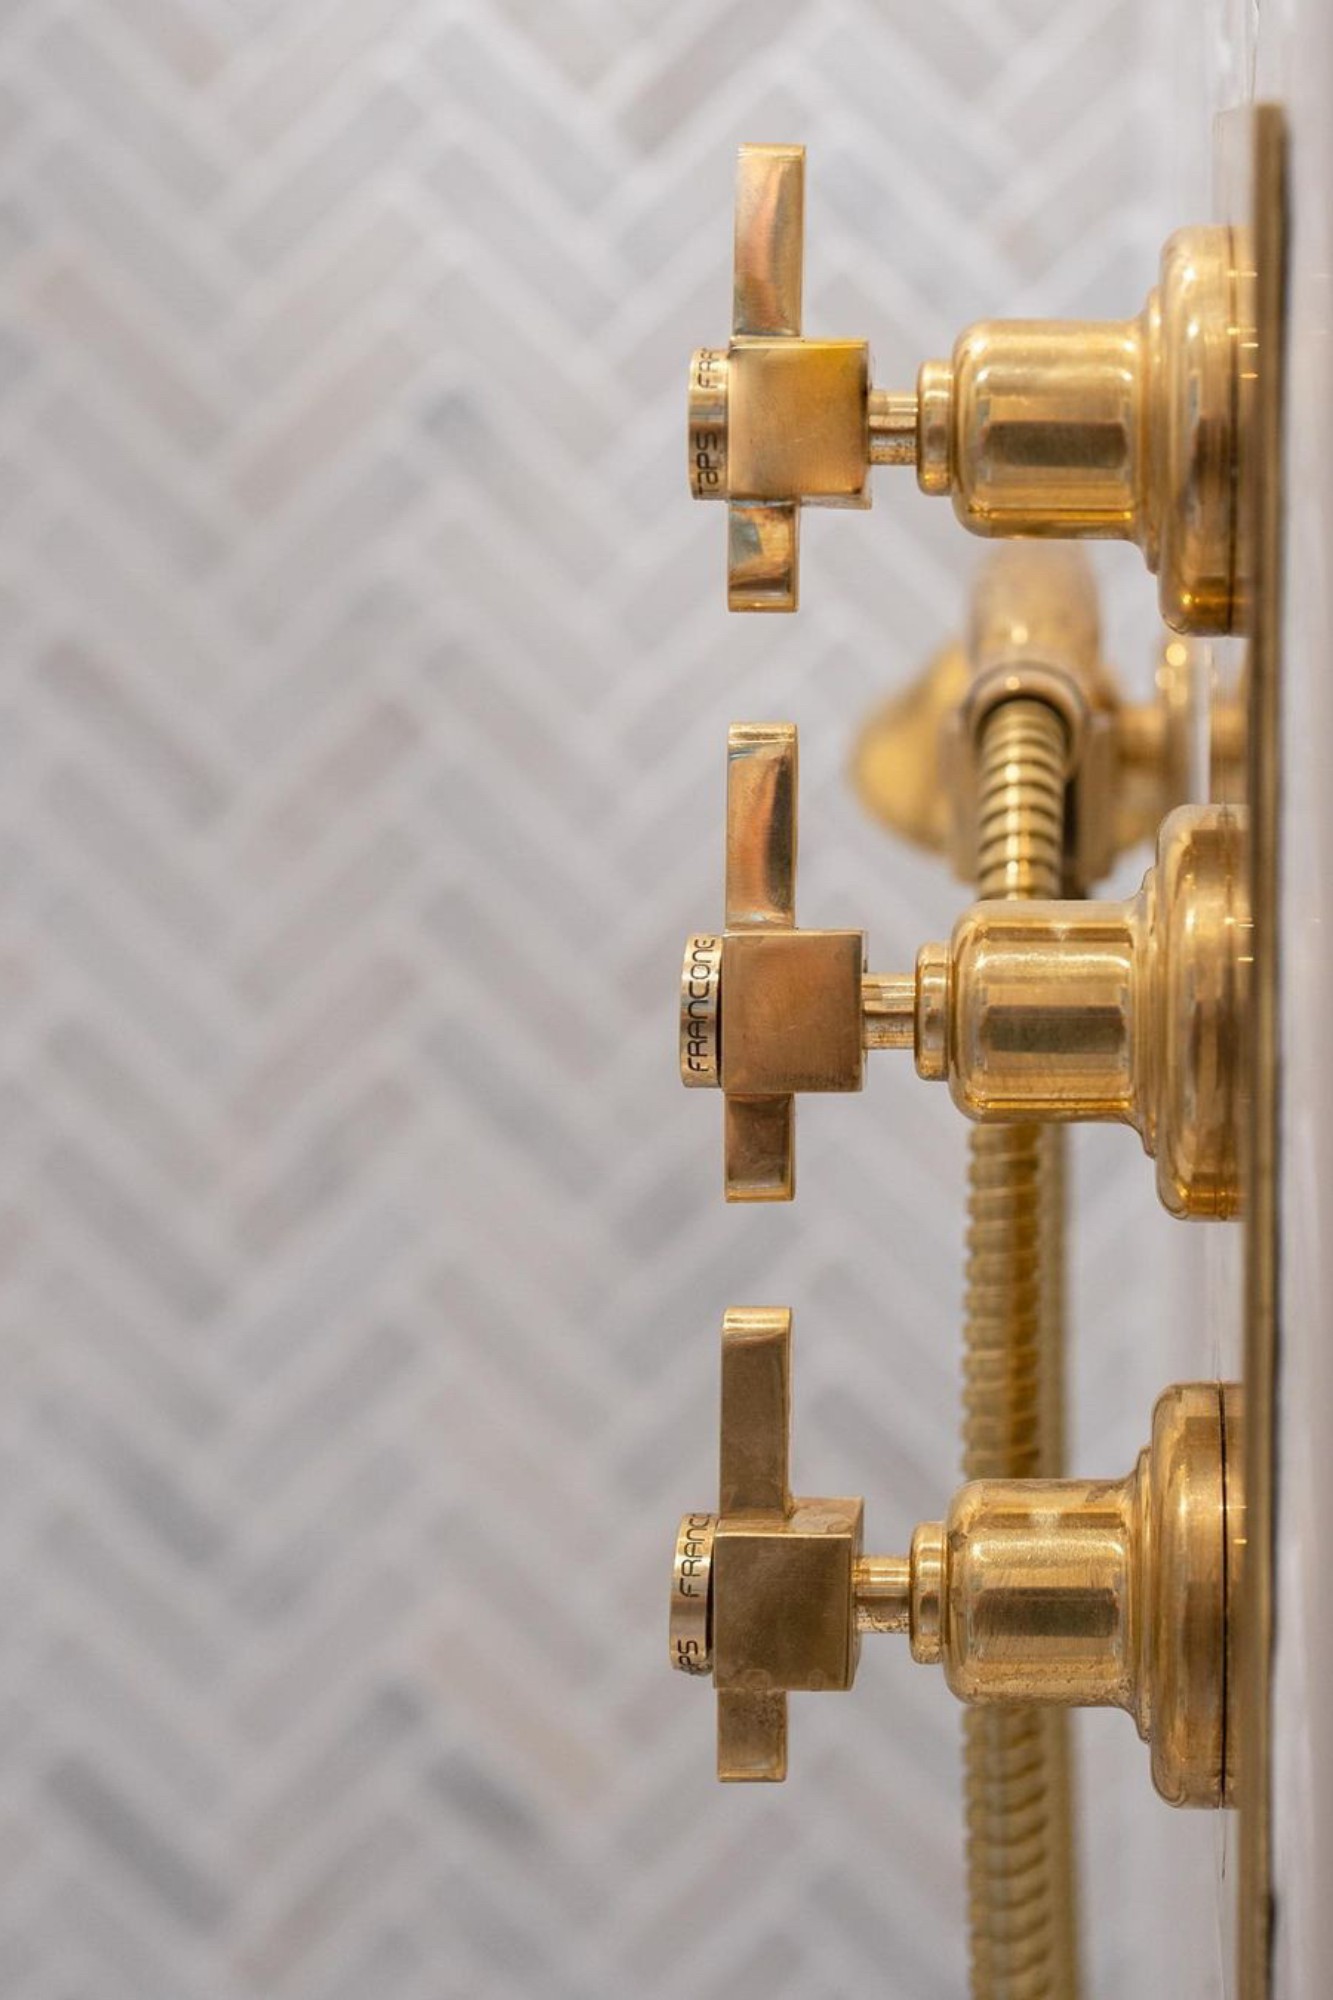 taps, The Story Behind Francone Bespoke Taps: Bringing Craftsmanship and Quality Together